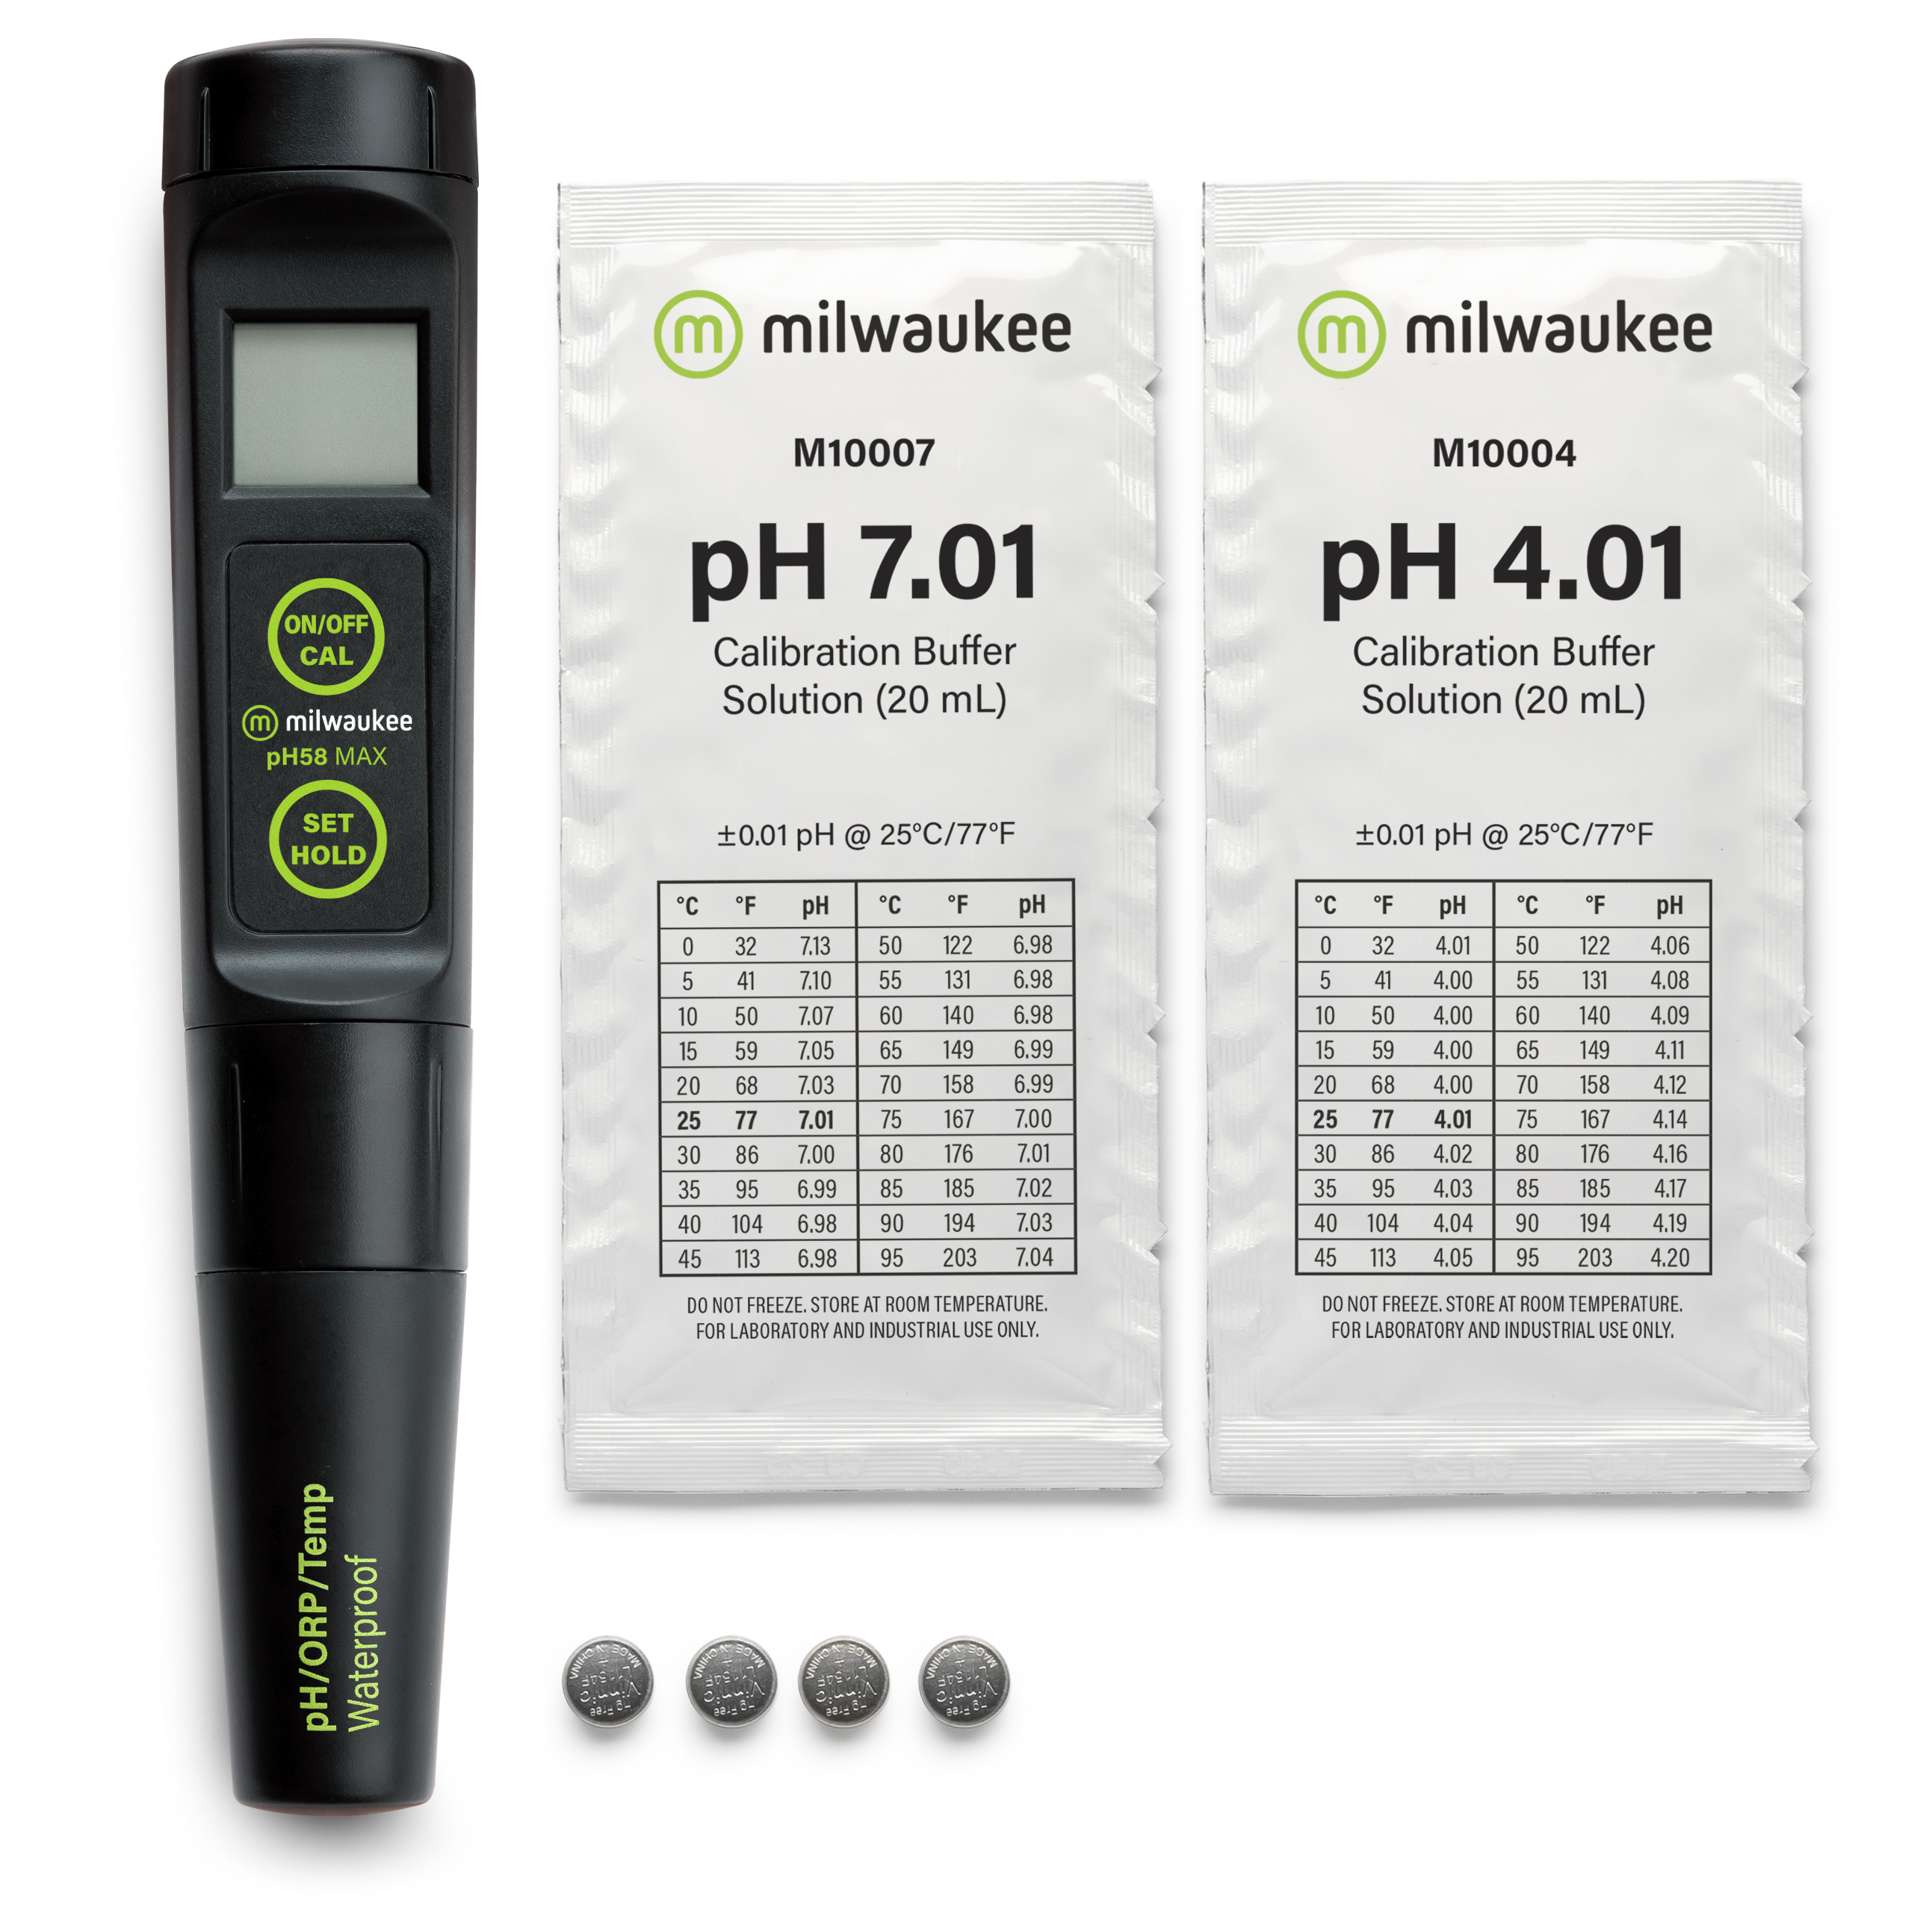 Milwaukee PH58 waterproof pH / ORP / Temperature Tester with automatic temperature compensation (ATC) and replaceable probe